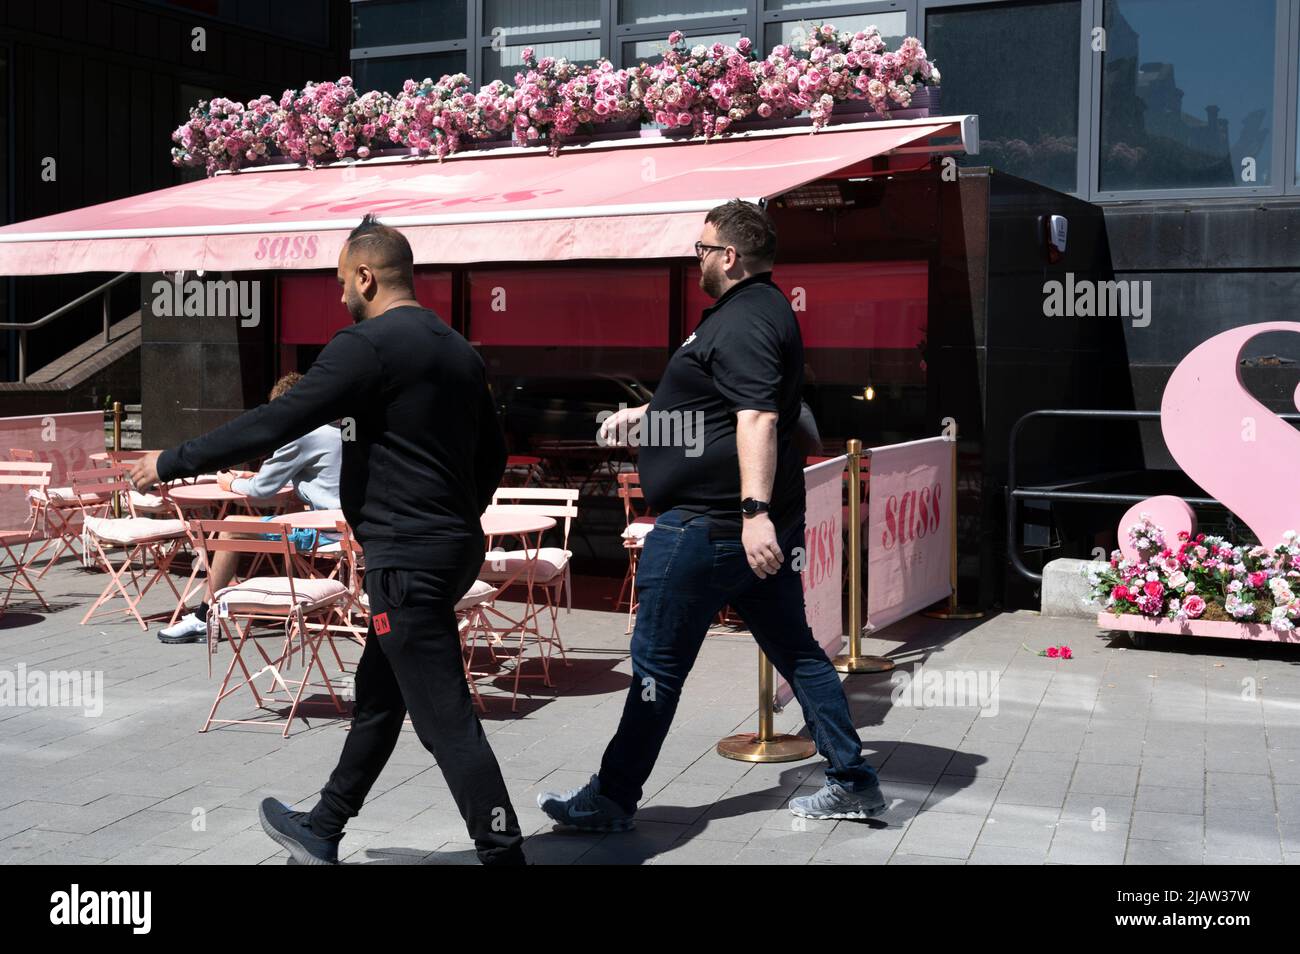 Liverpool, England, Uk. Two men walk past a pink painted bar. Stock Photo